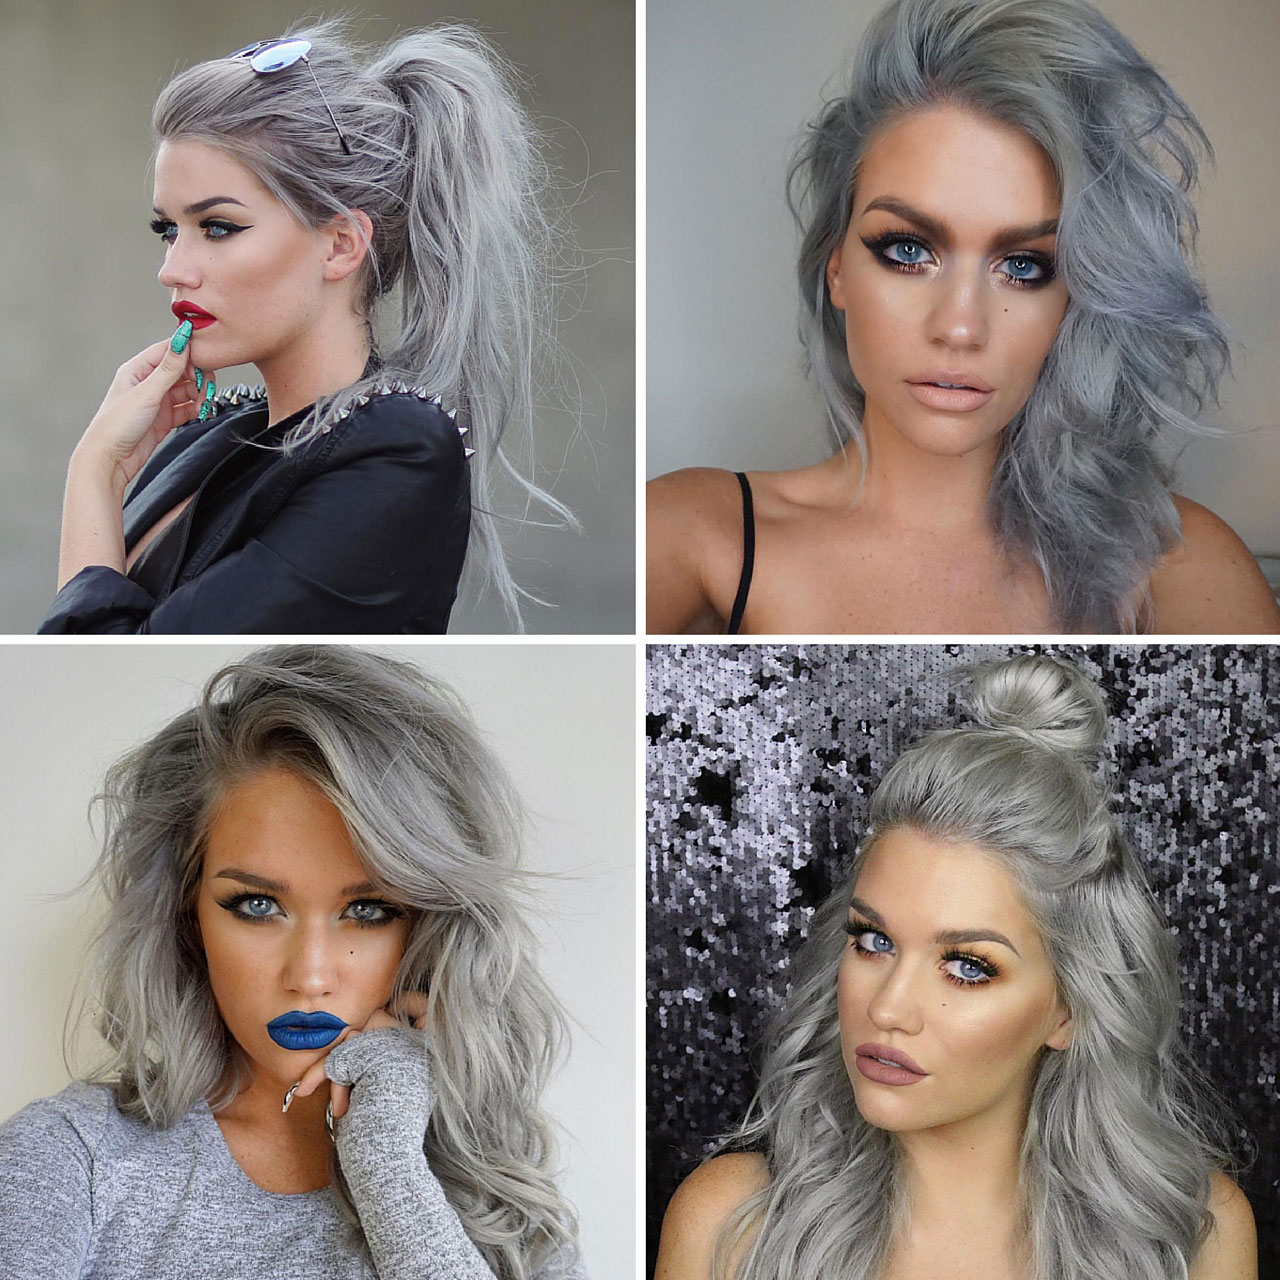 Silver Lining Fashion Book - Top 5 Hair Color Trends For 2016